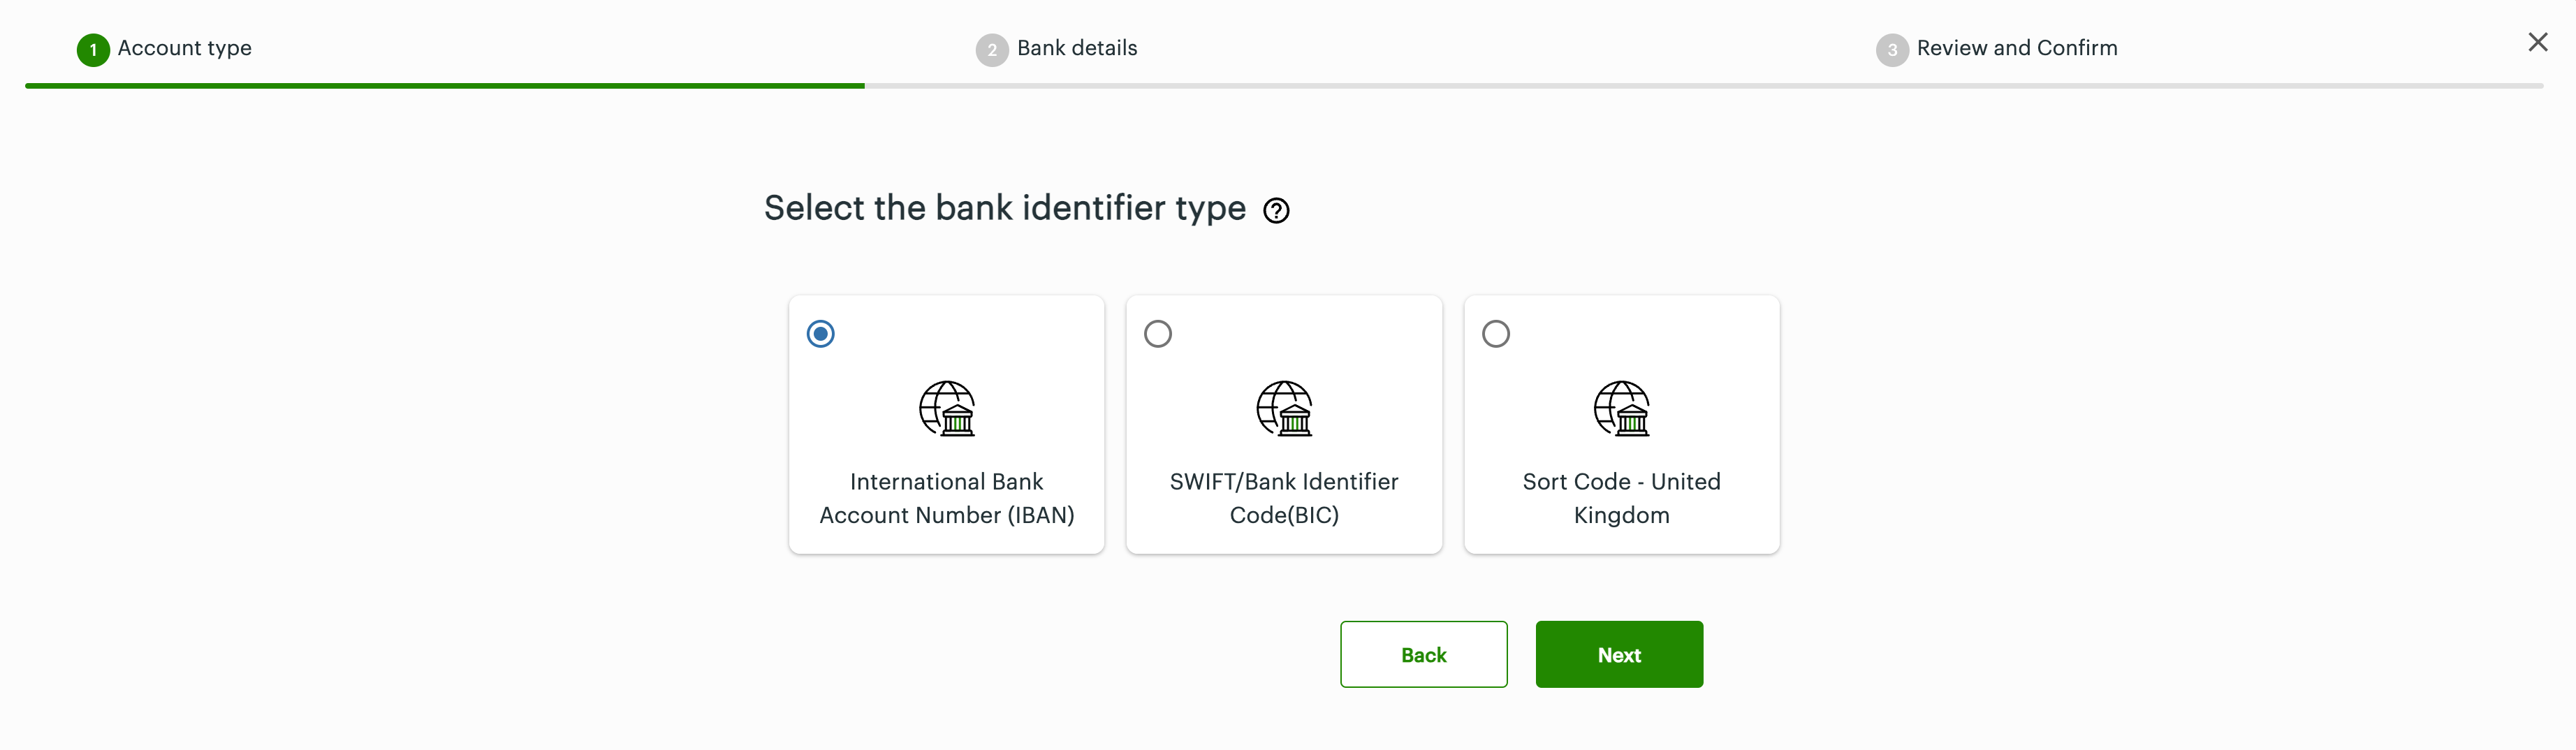 Select the bank identifier type: IBAN